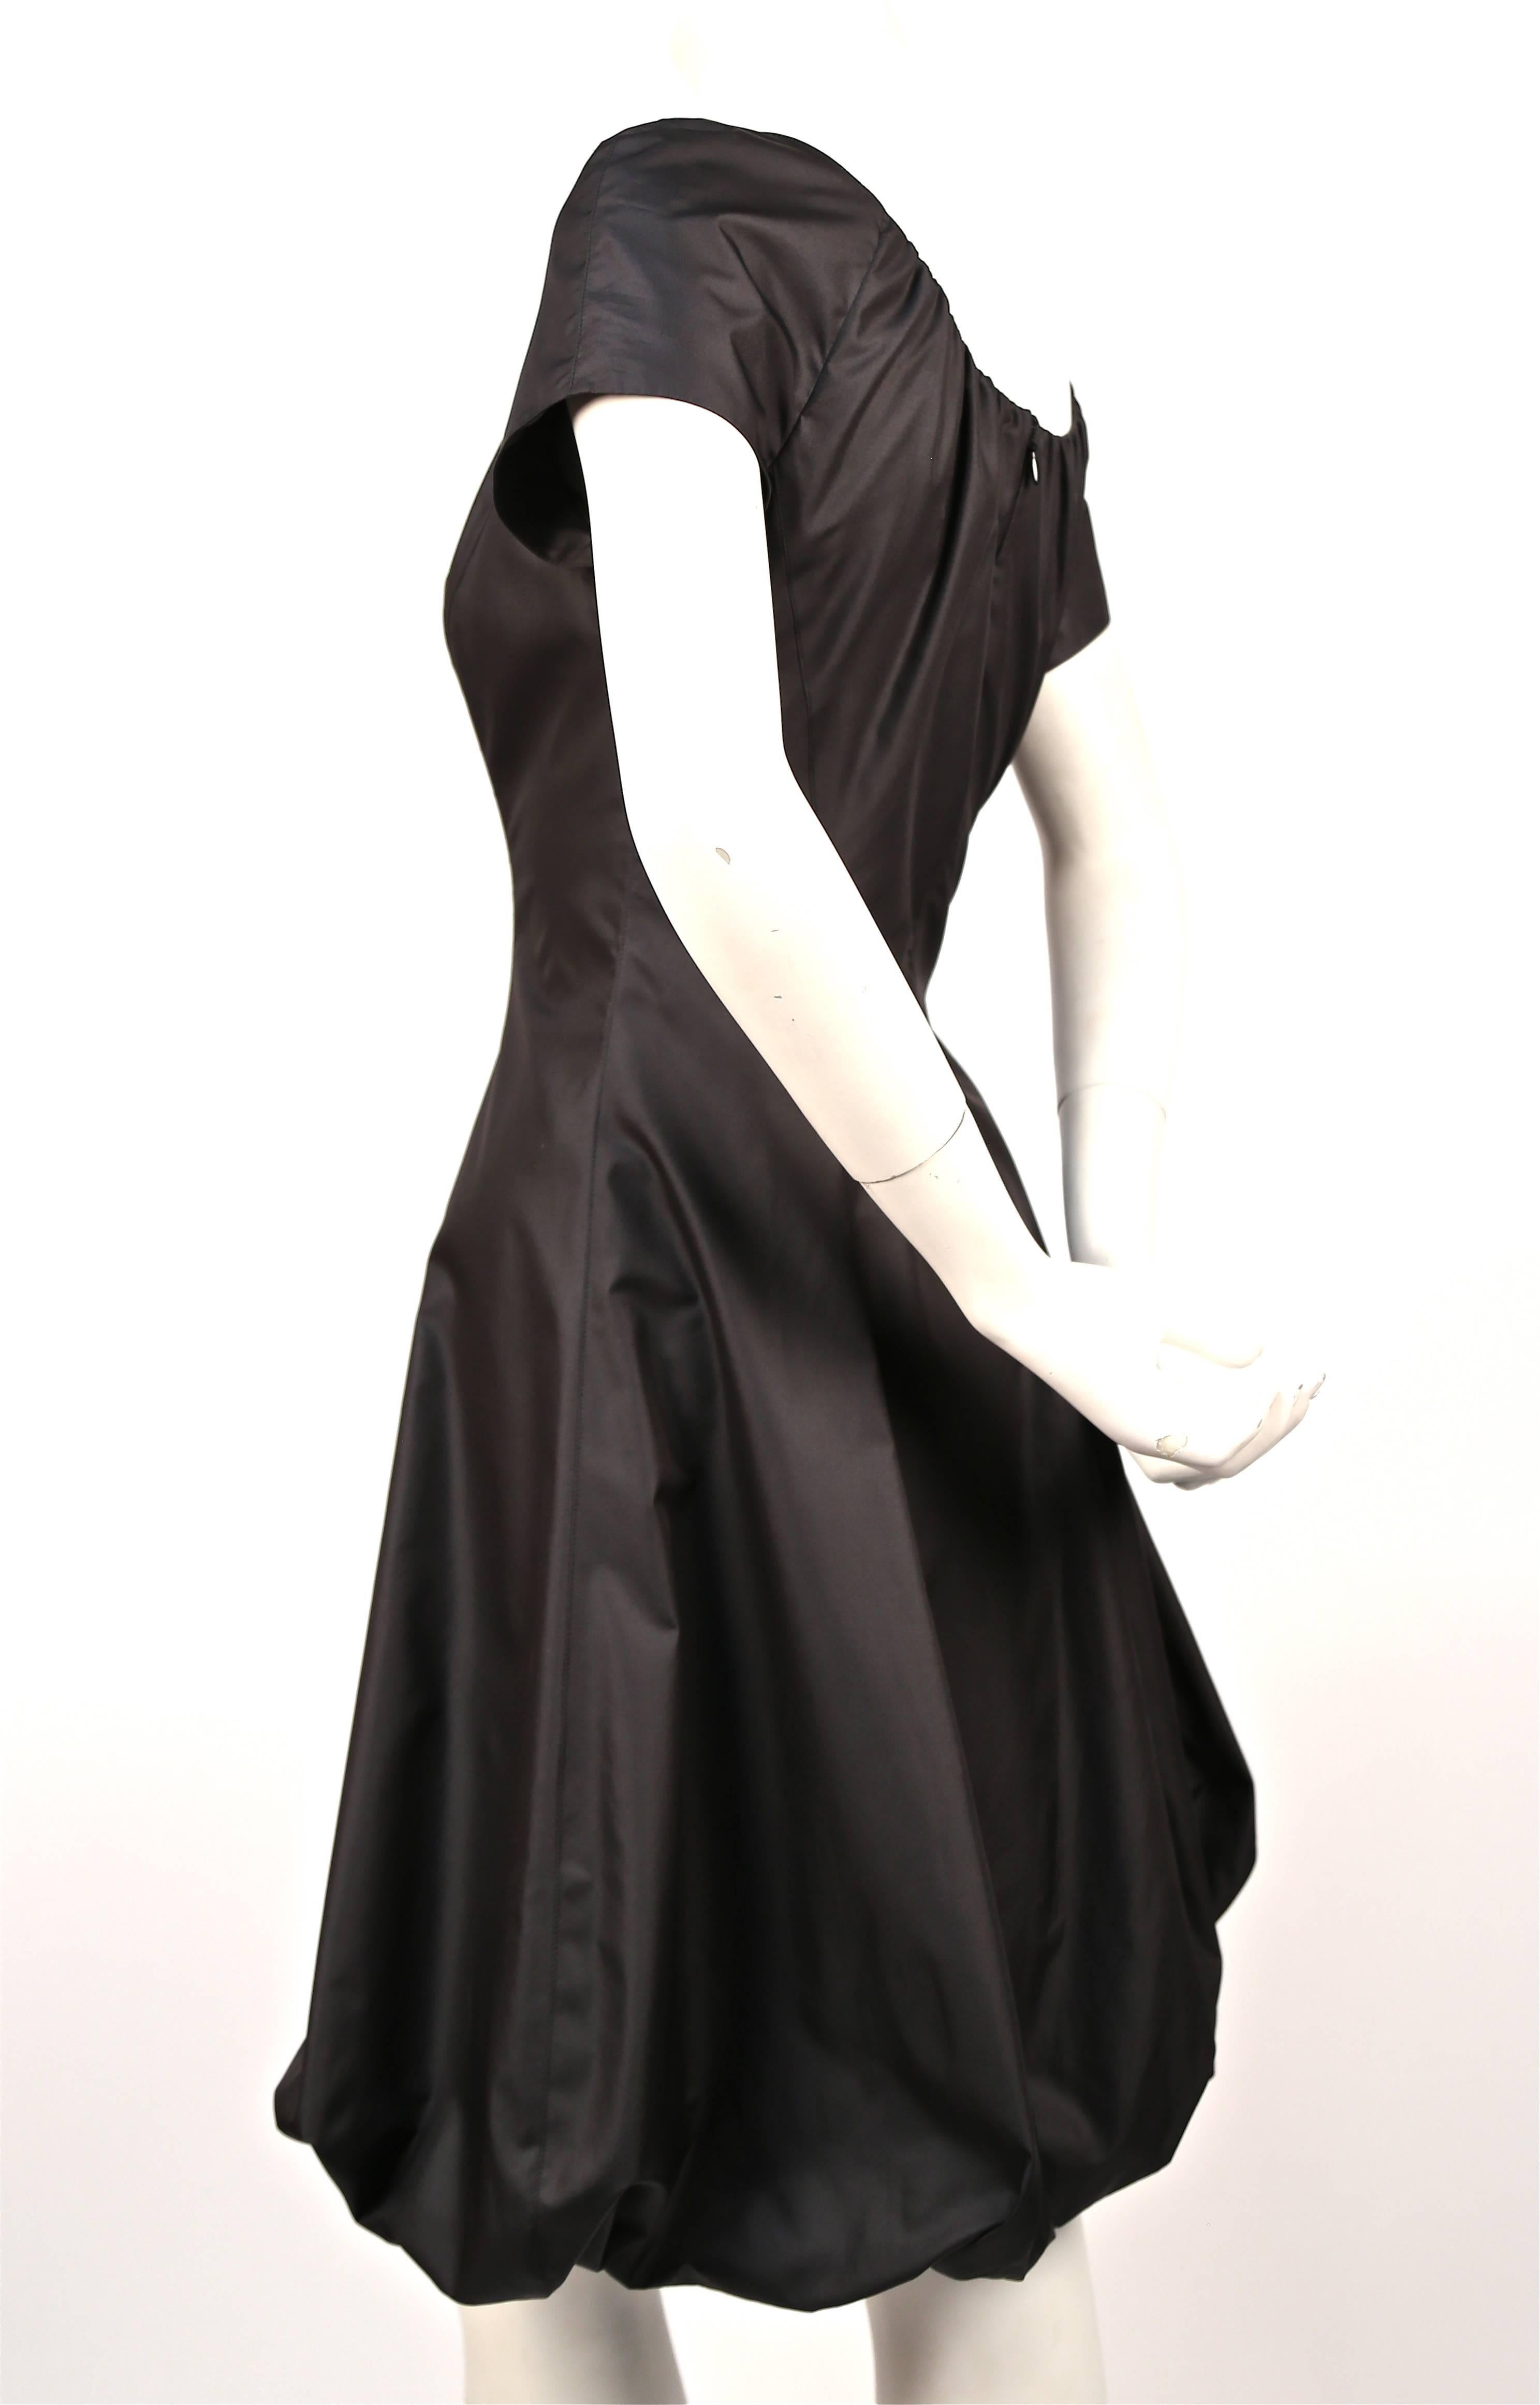 Jet black silk dress with gathered neckline and bubble hemline from Thierry Mugler dating to the 1990's. Labeled French size 38, which best fits a US 4 or 6. Dress measures approximately: 36